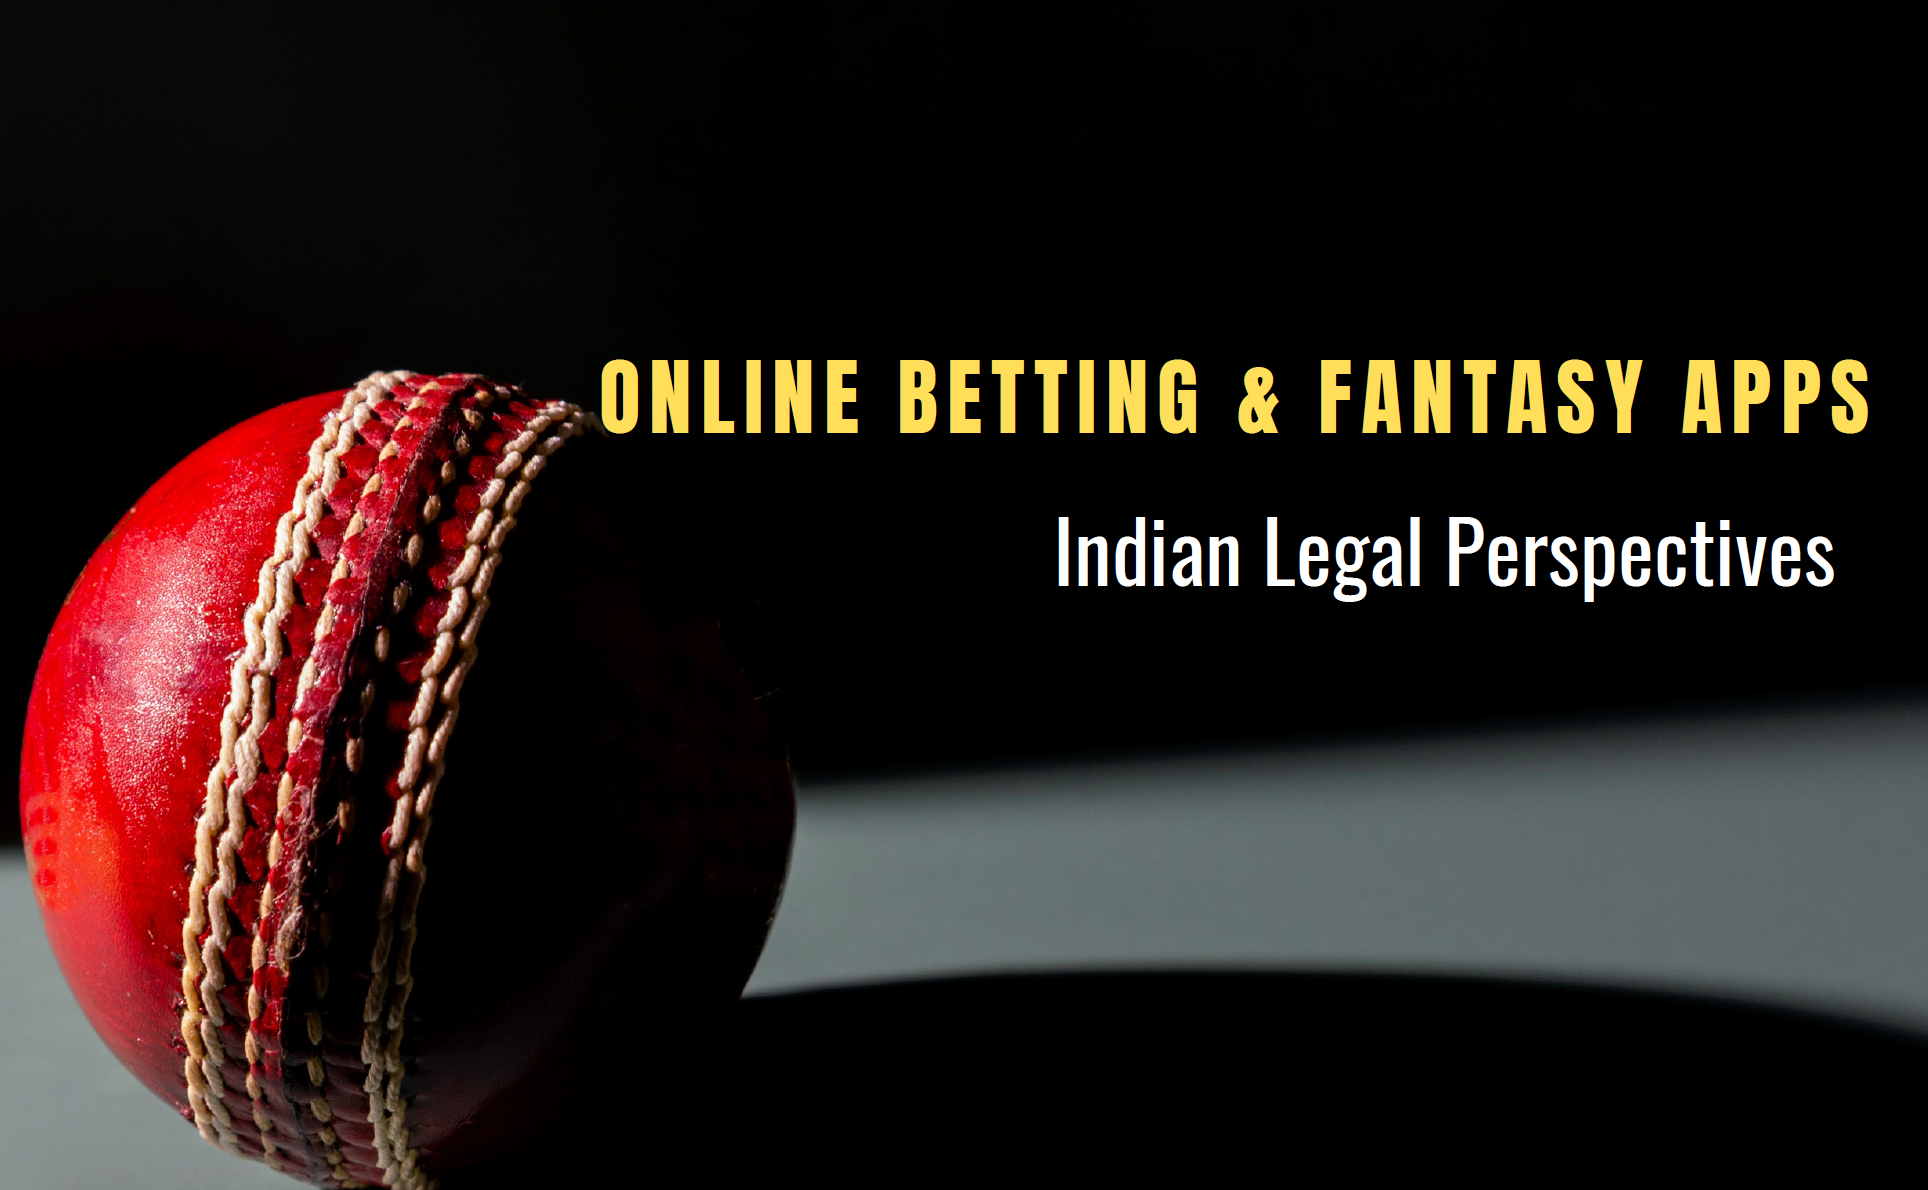 Learn How To Cricket Betting Apps In India Persuasively In 3 Easy Steps